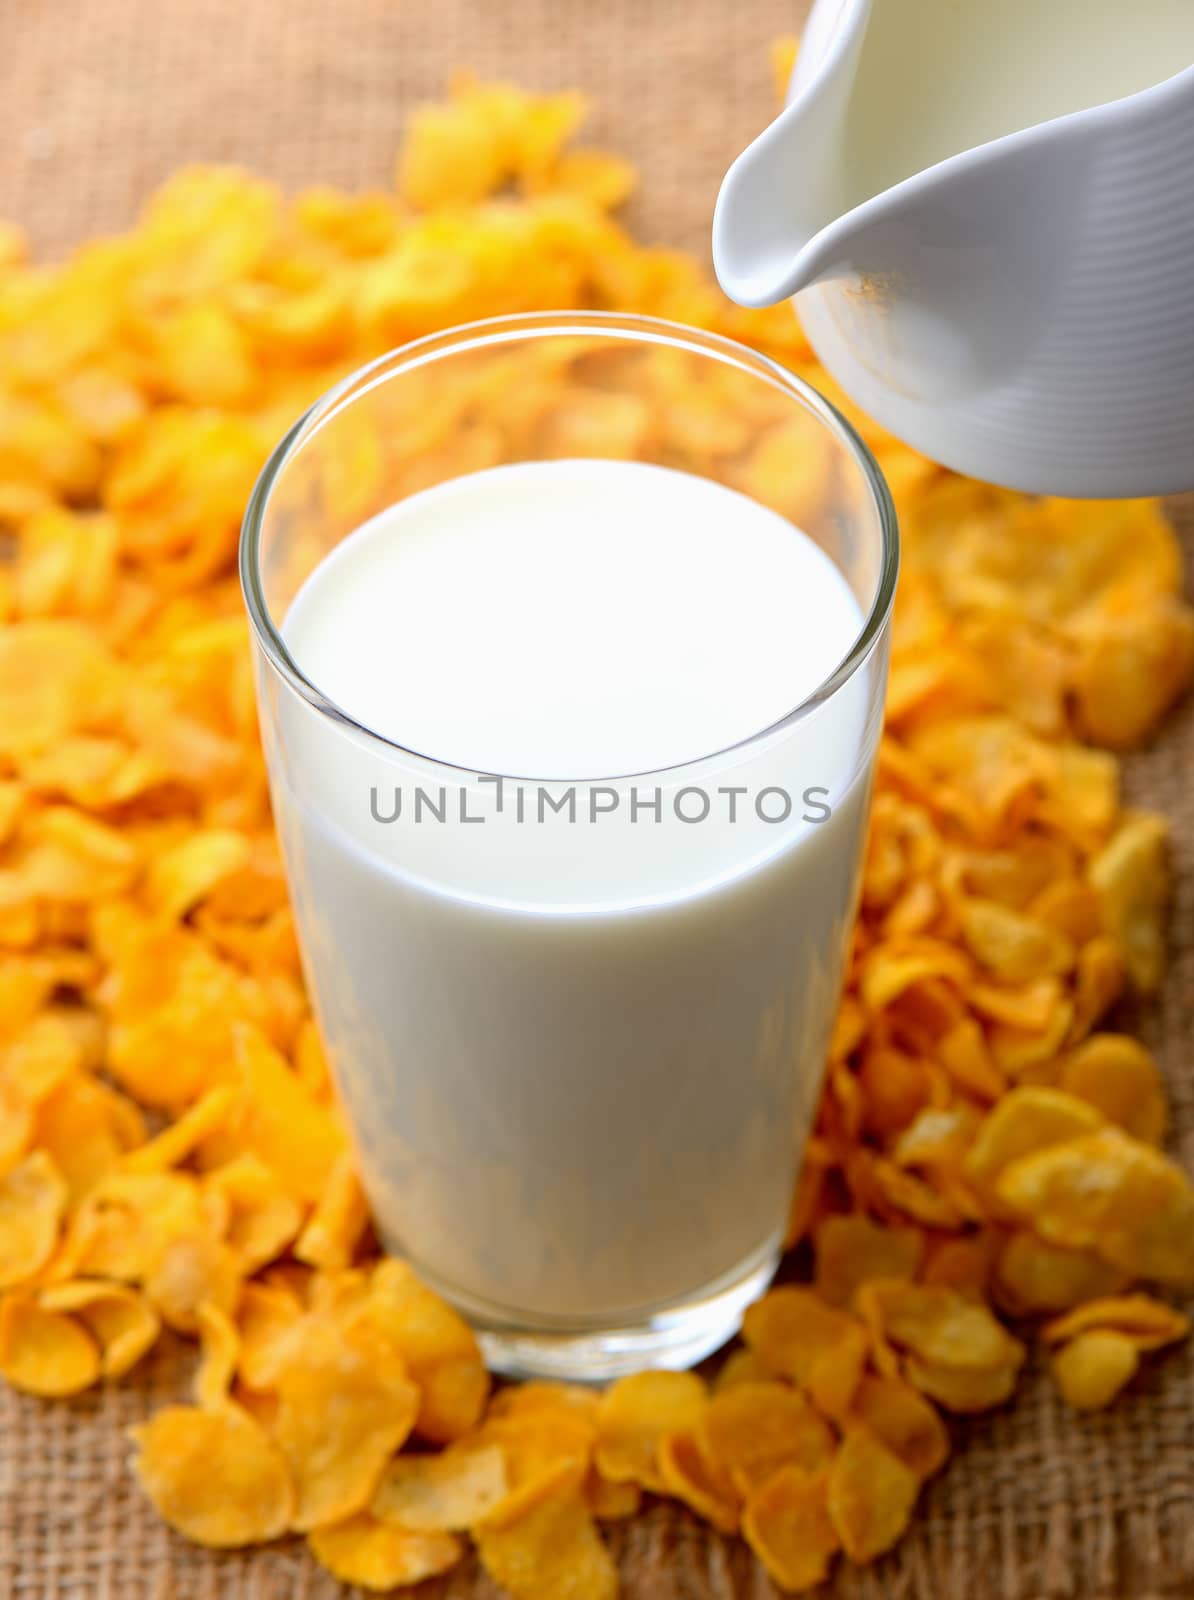 glass of milk and cereals on the wooden table